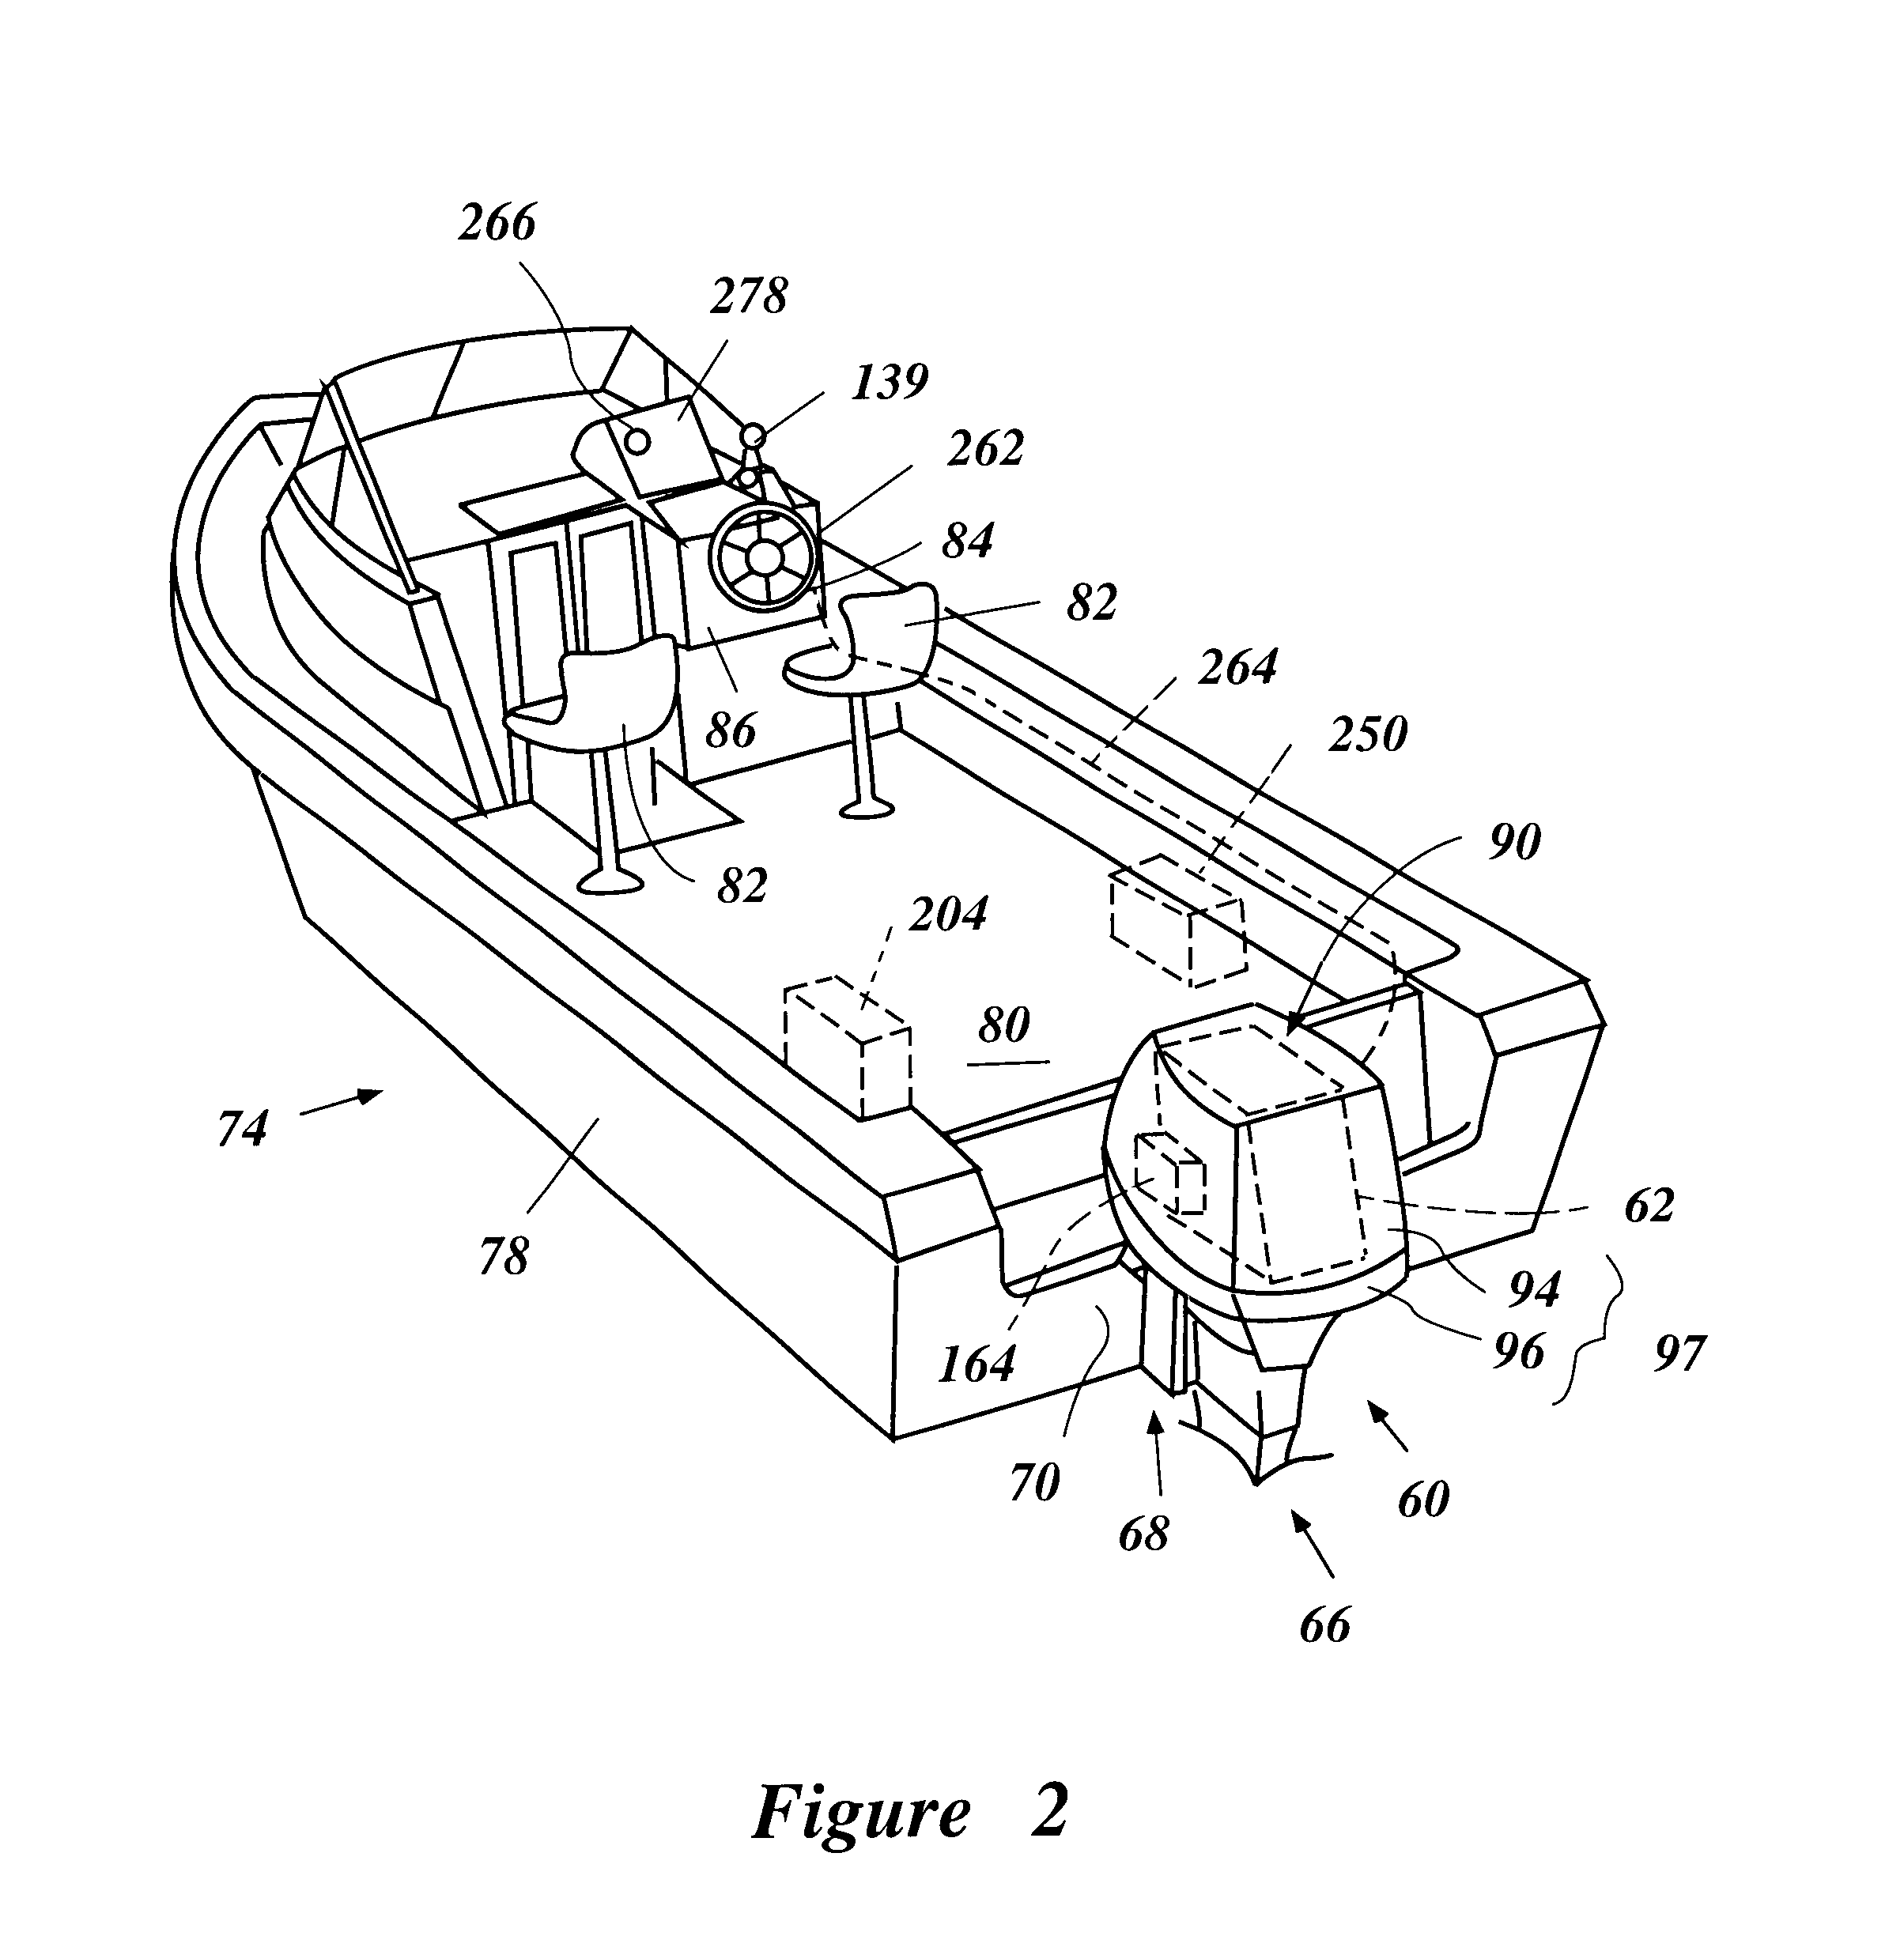 Electrical control for engine